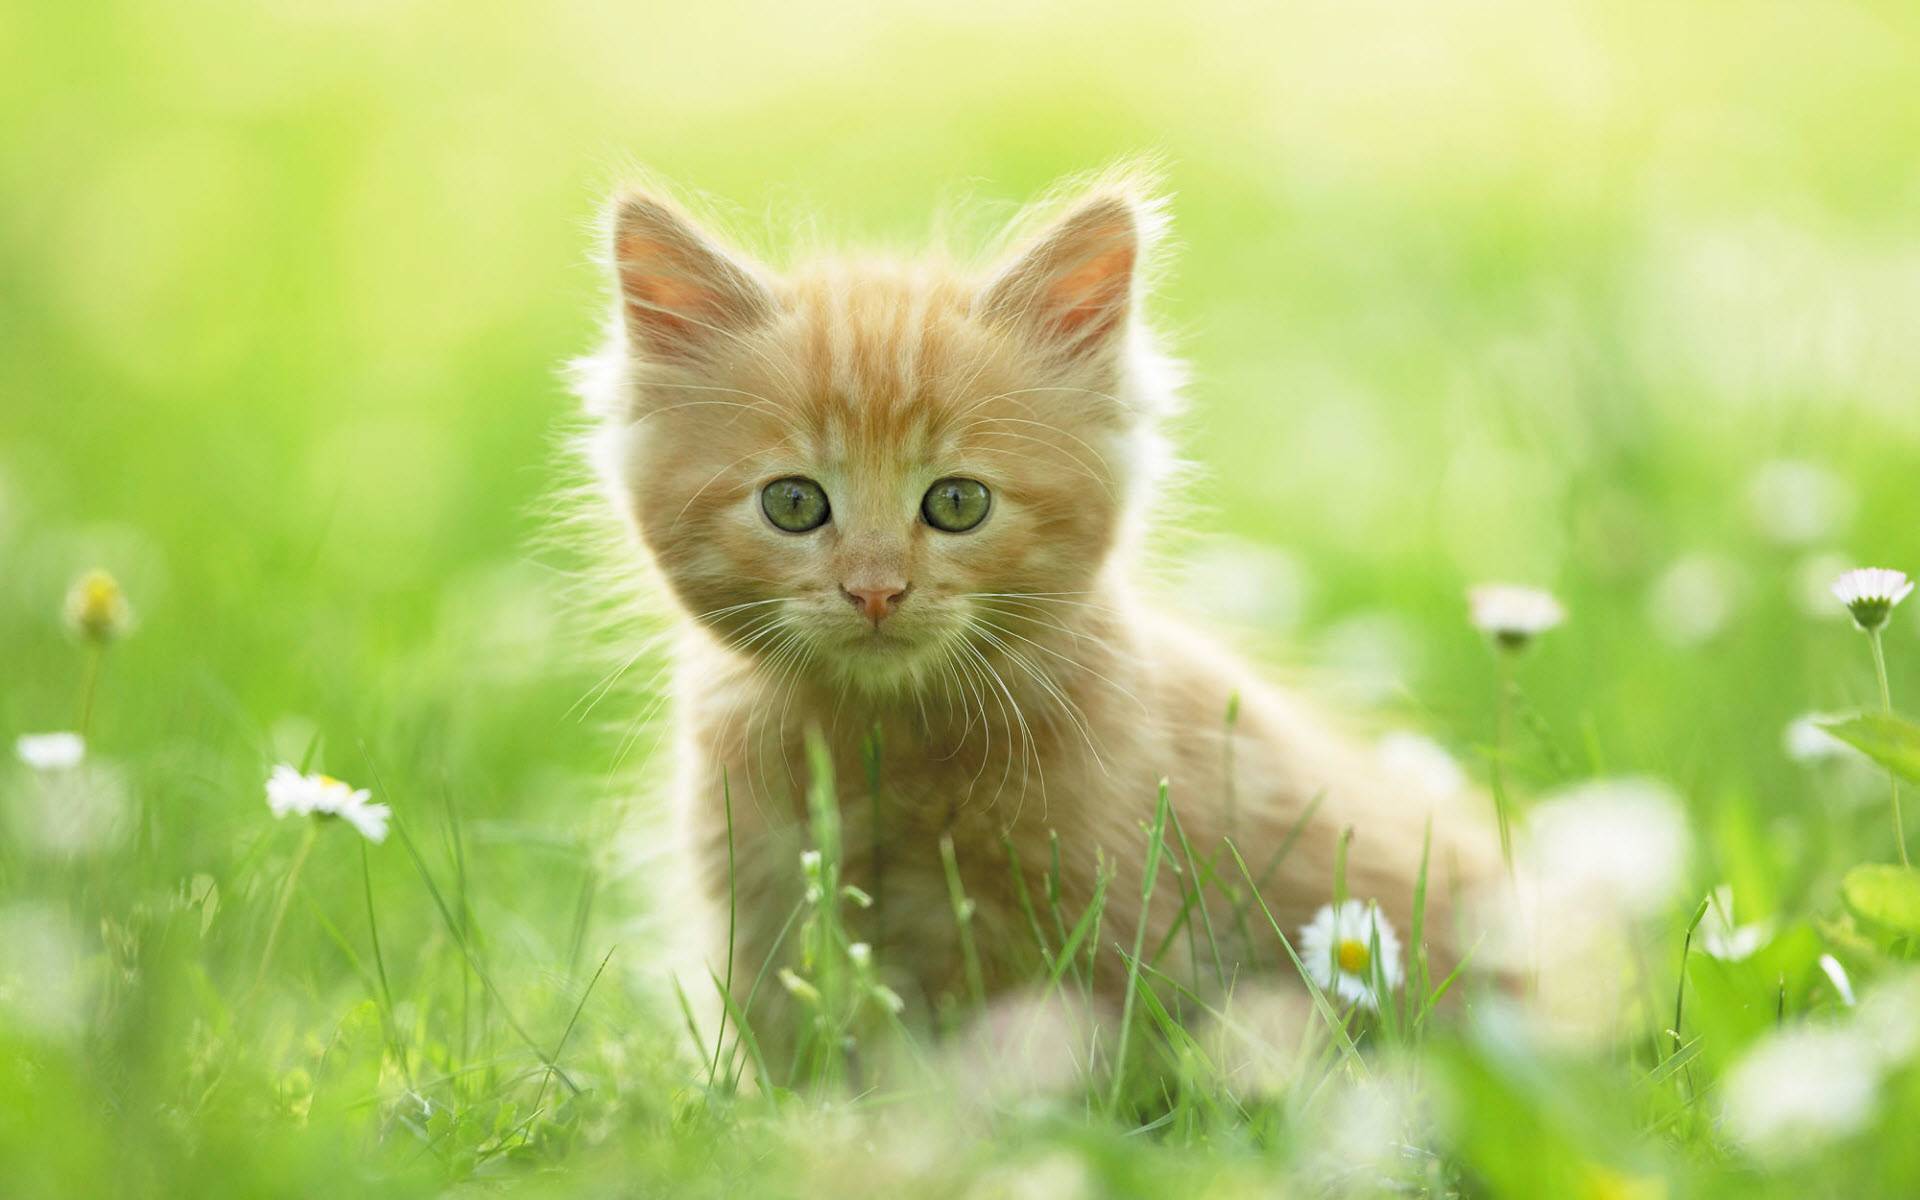 Kittens Wallpaper Android Application